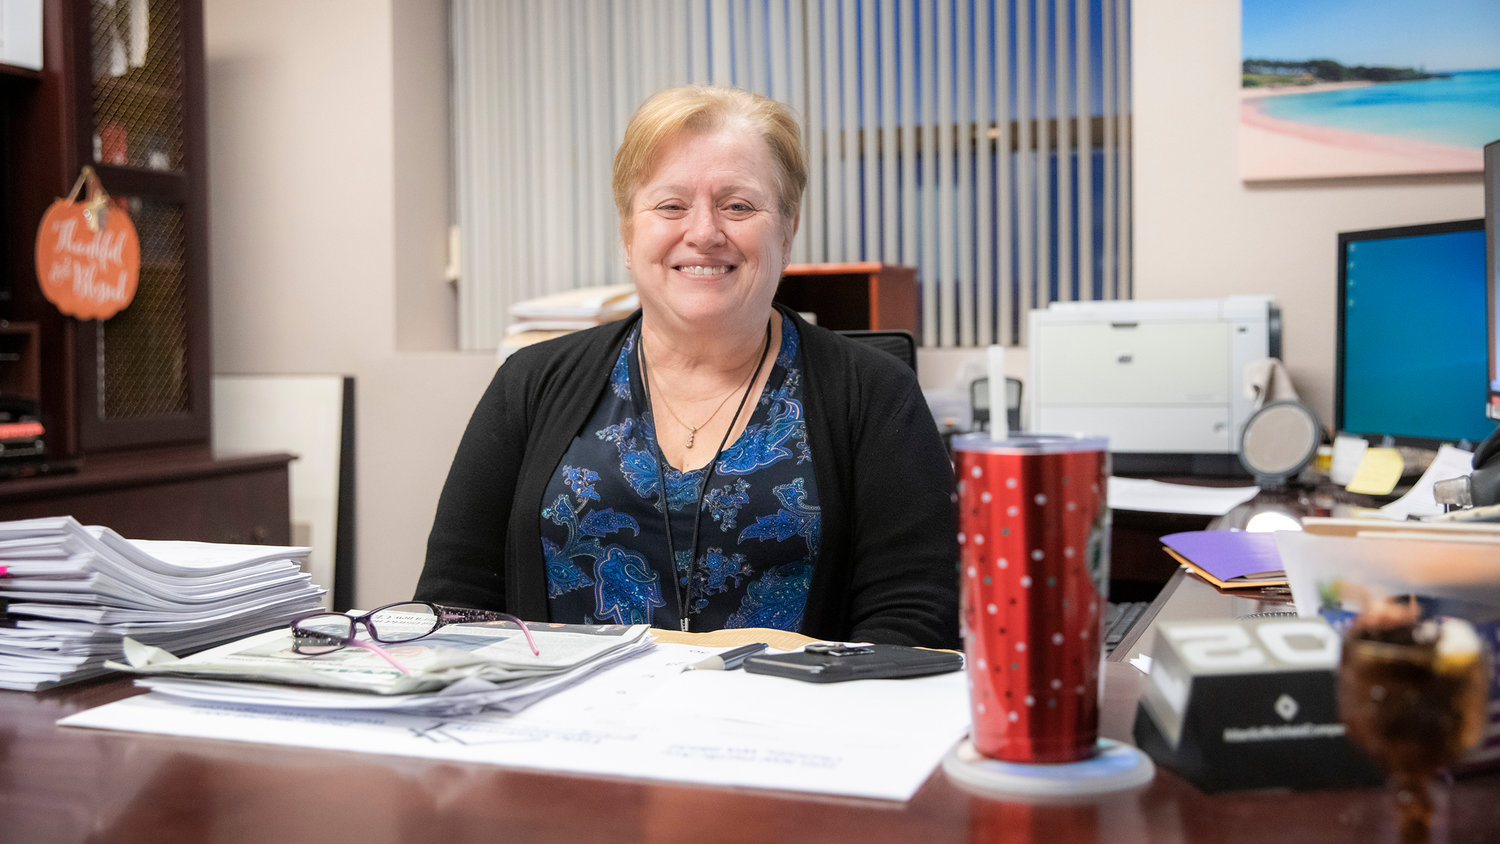 Lewis County Assessor Dianne Dorey smiles for a photo in her office Tuesday evening in Chehalis.